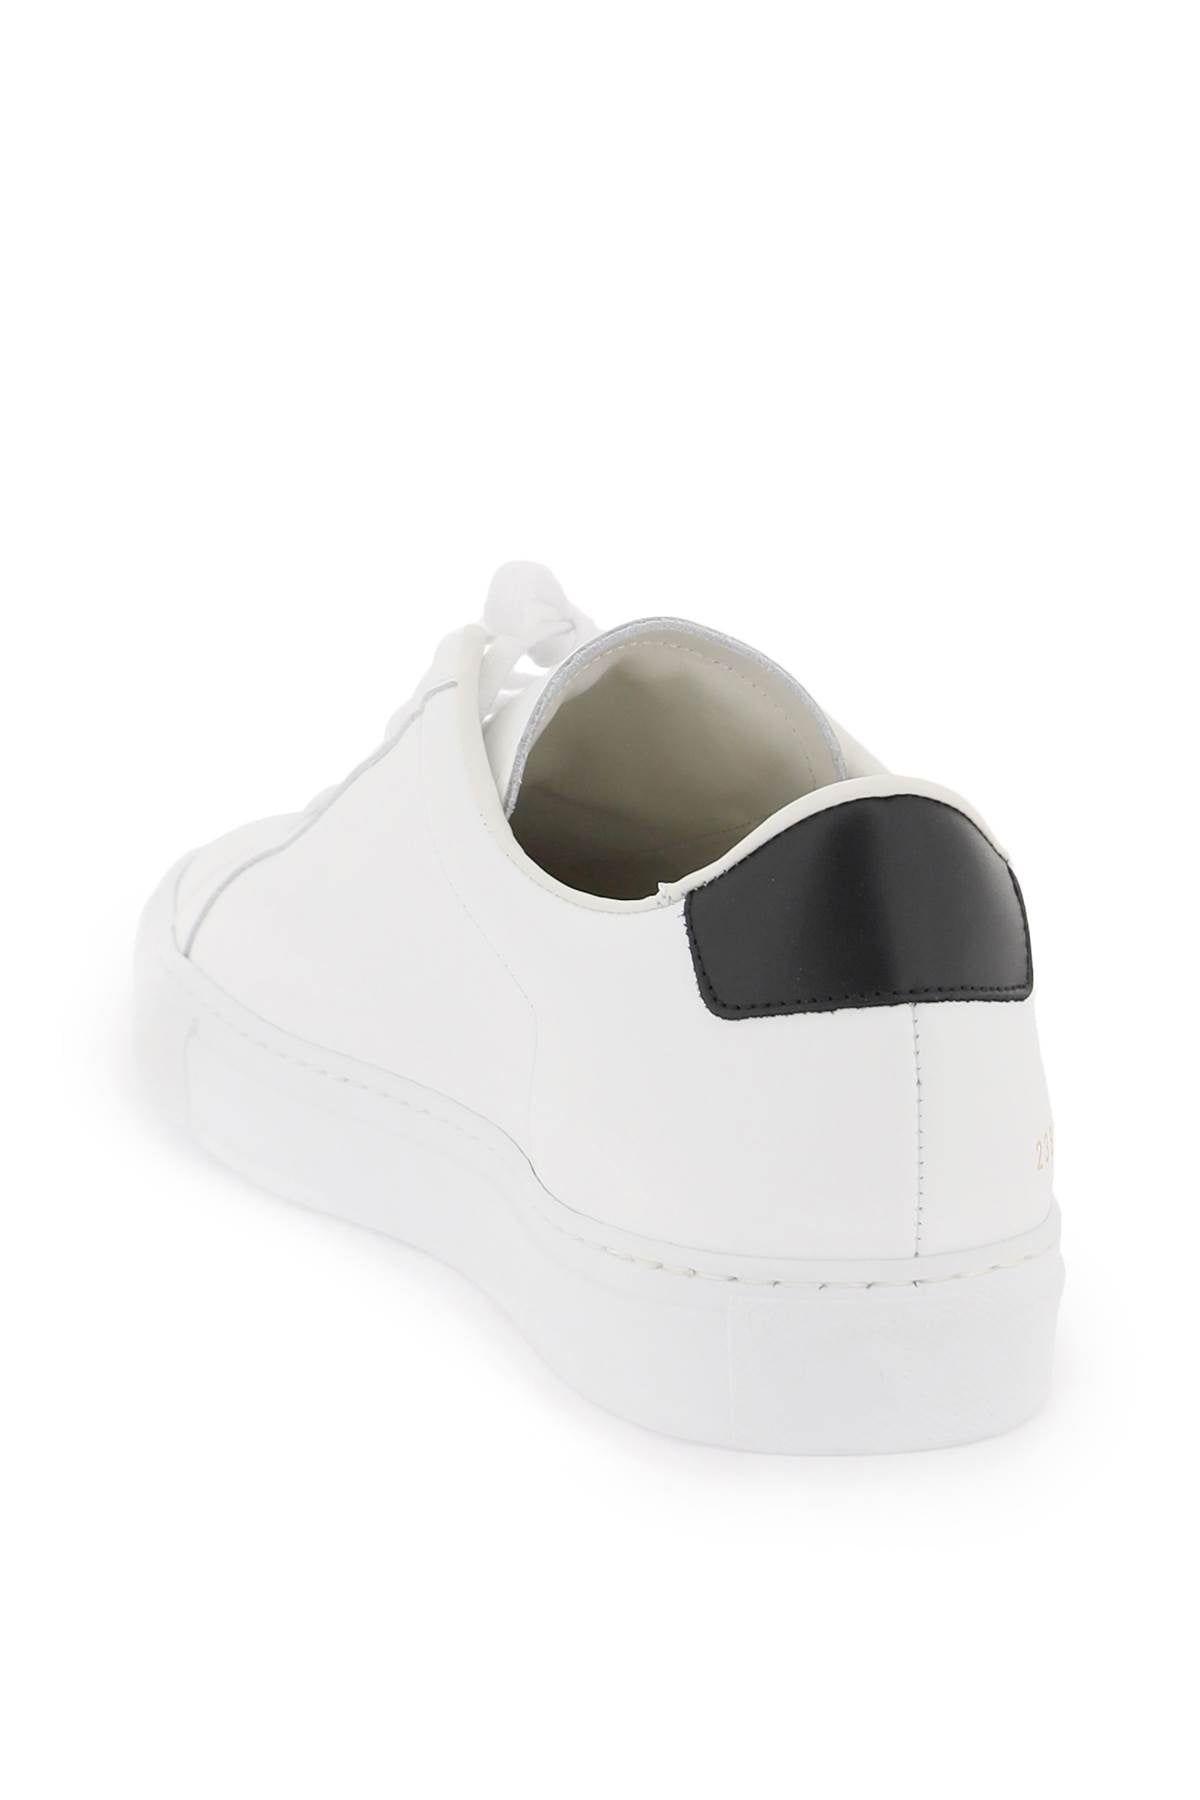 Oversized Leather And Velvet Sneakers With Platform For Men And Women White  And Black Casual Leather Sneakers With Lace Up Detail From Aj_boots, $50.74  | DHgate.Com